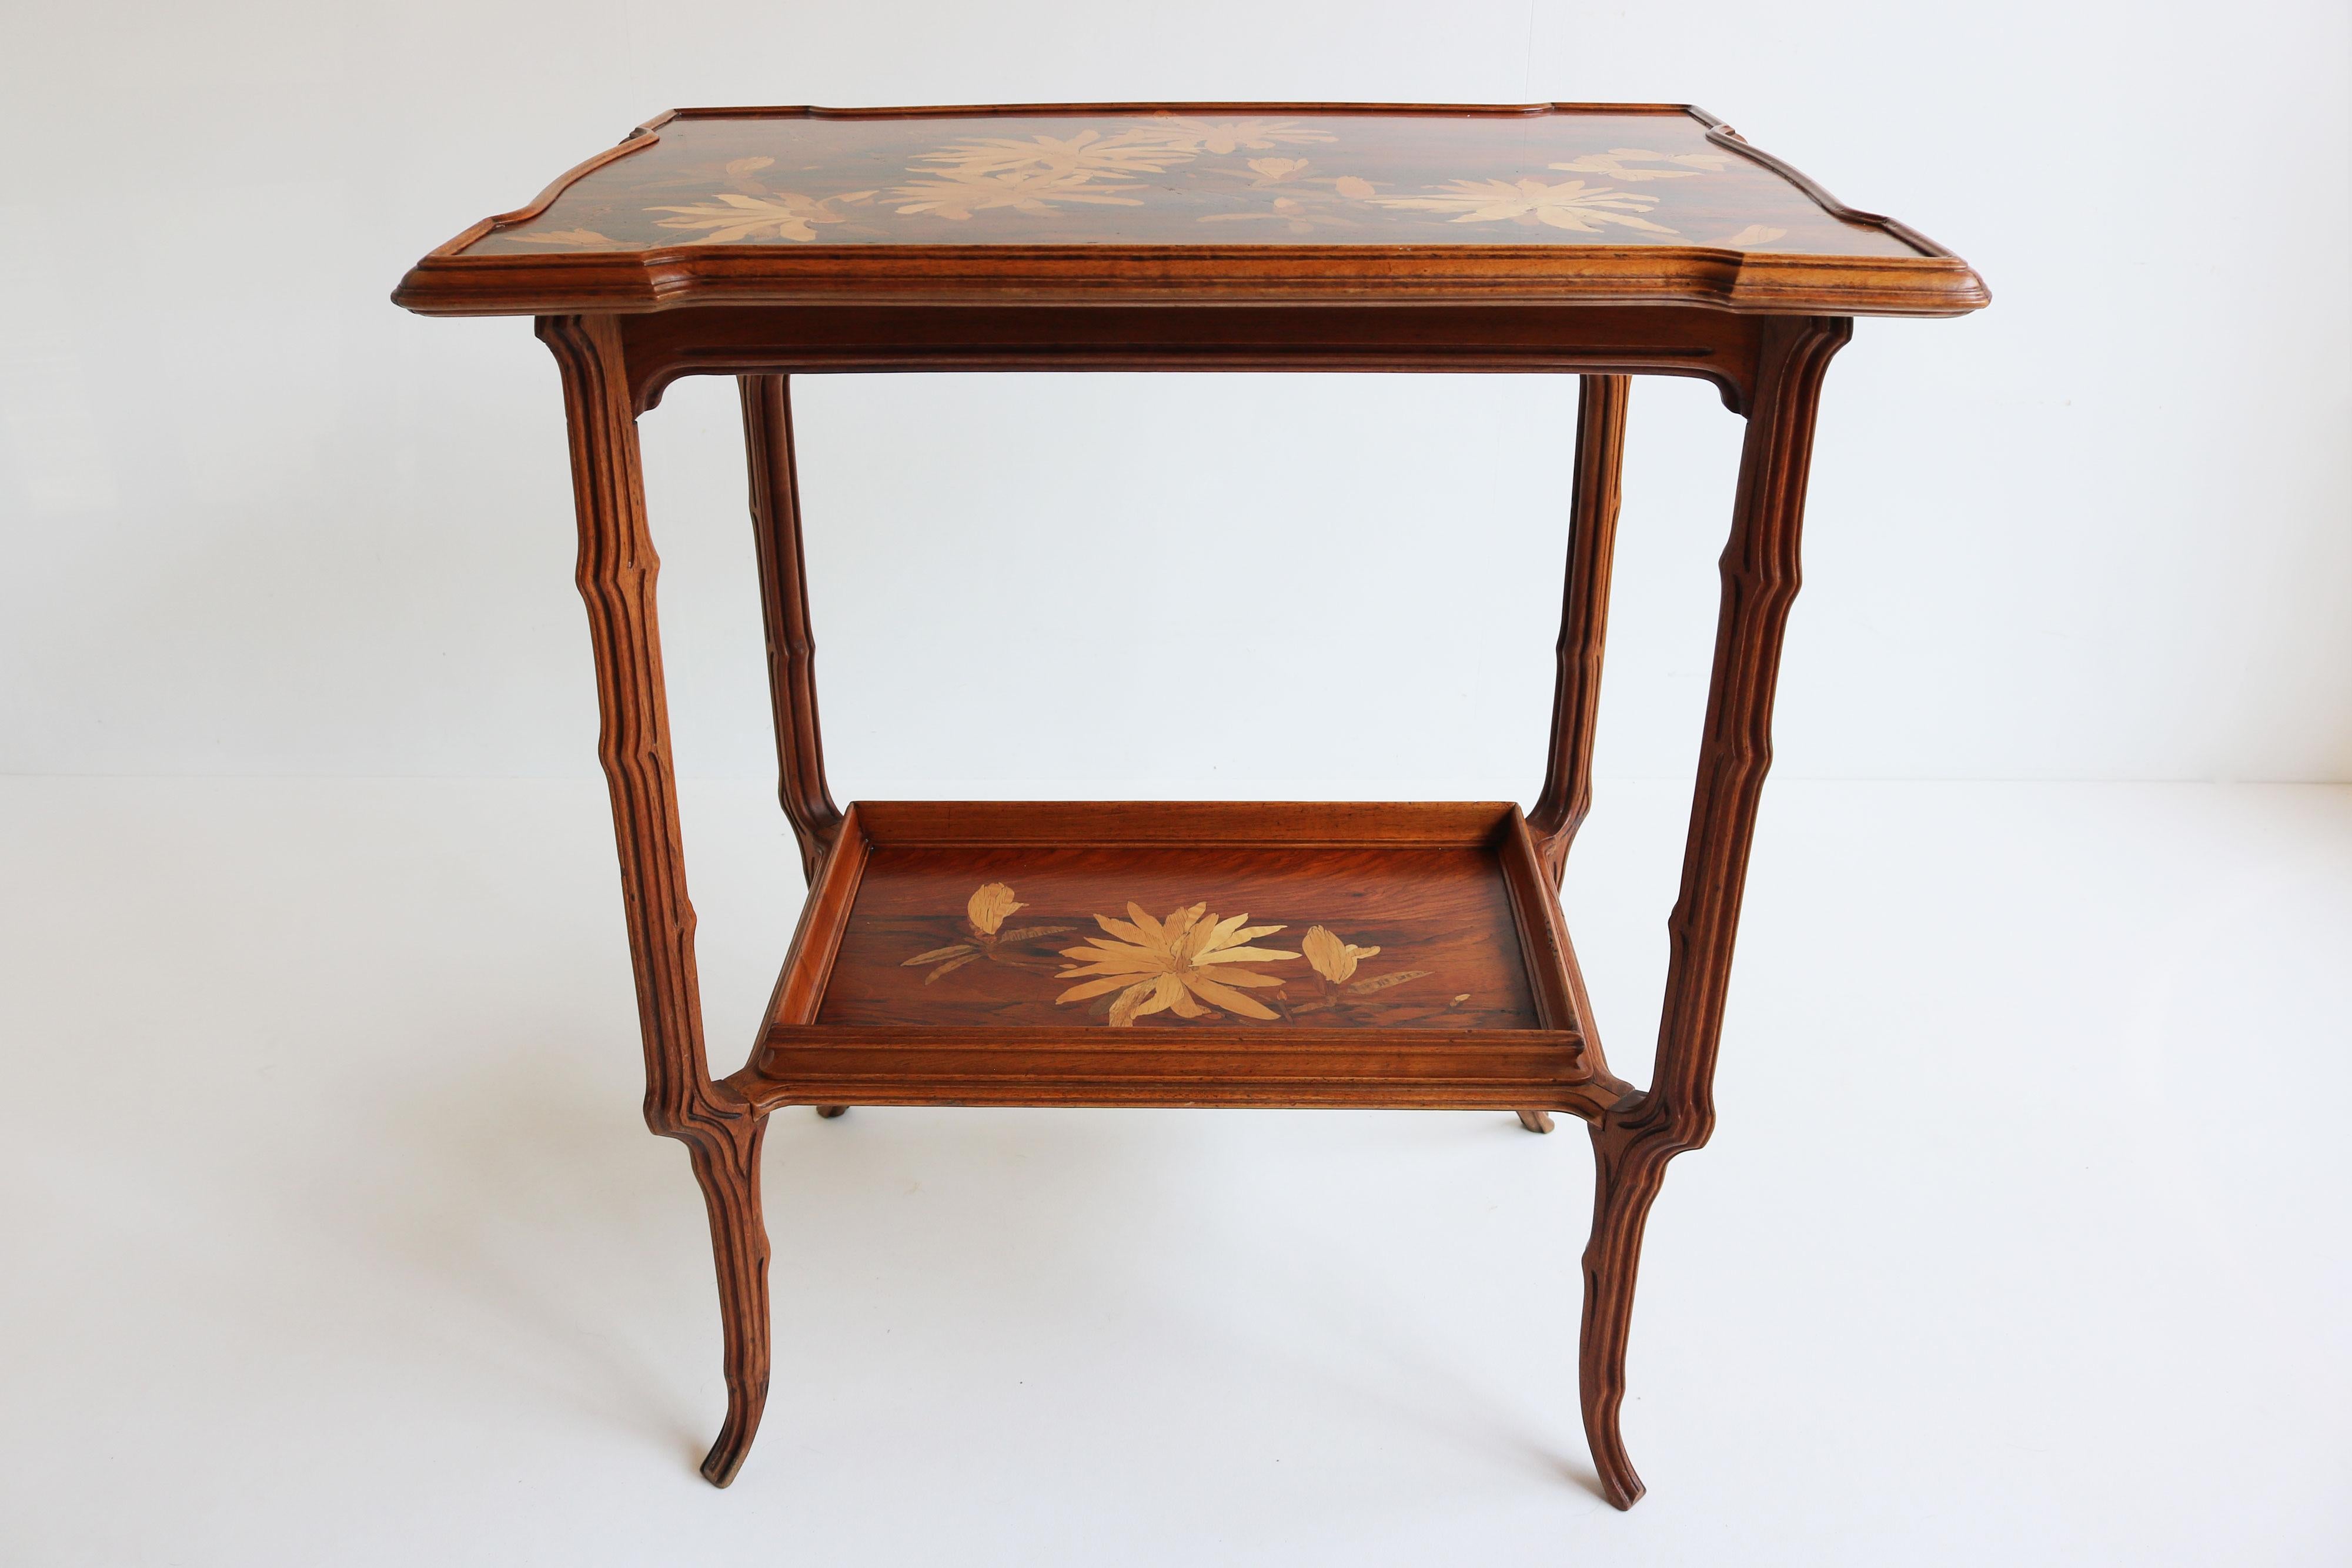 Original French Art Nouveau Marquetry Table ''Japonisme'' by Emile Galle 1900 For Sale 3